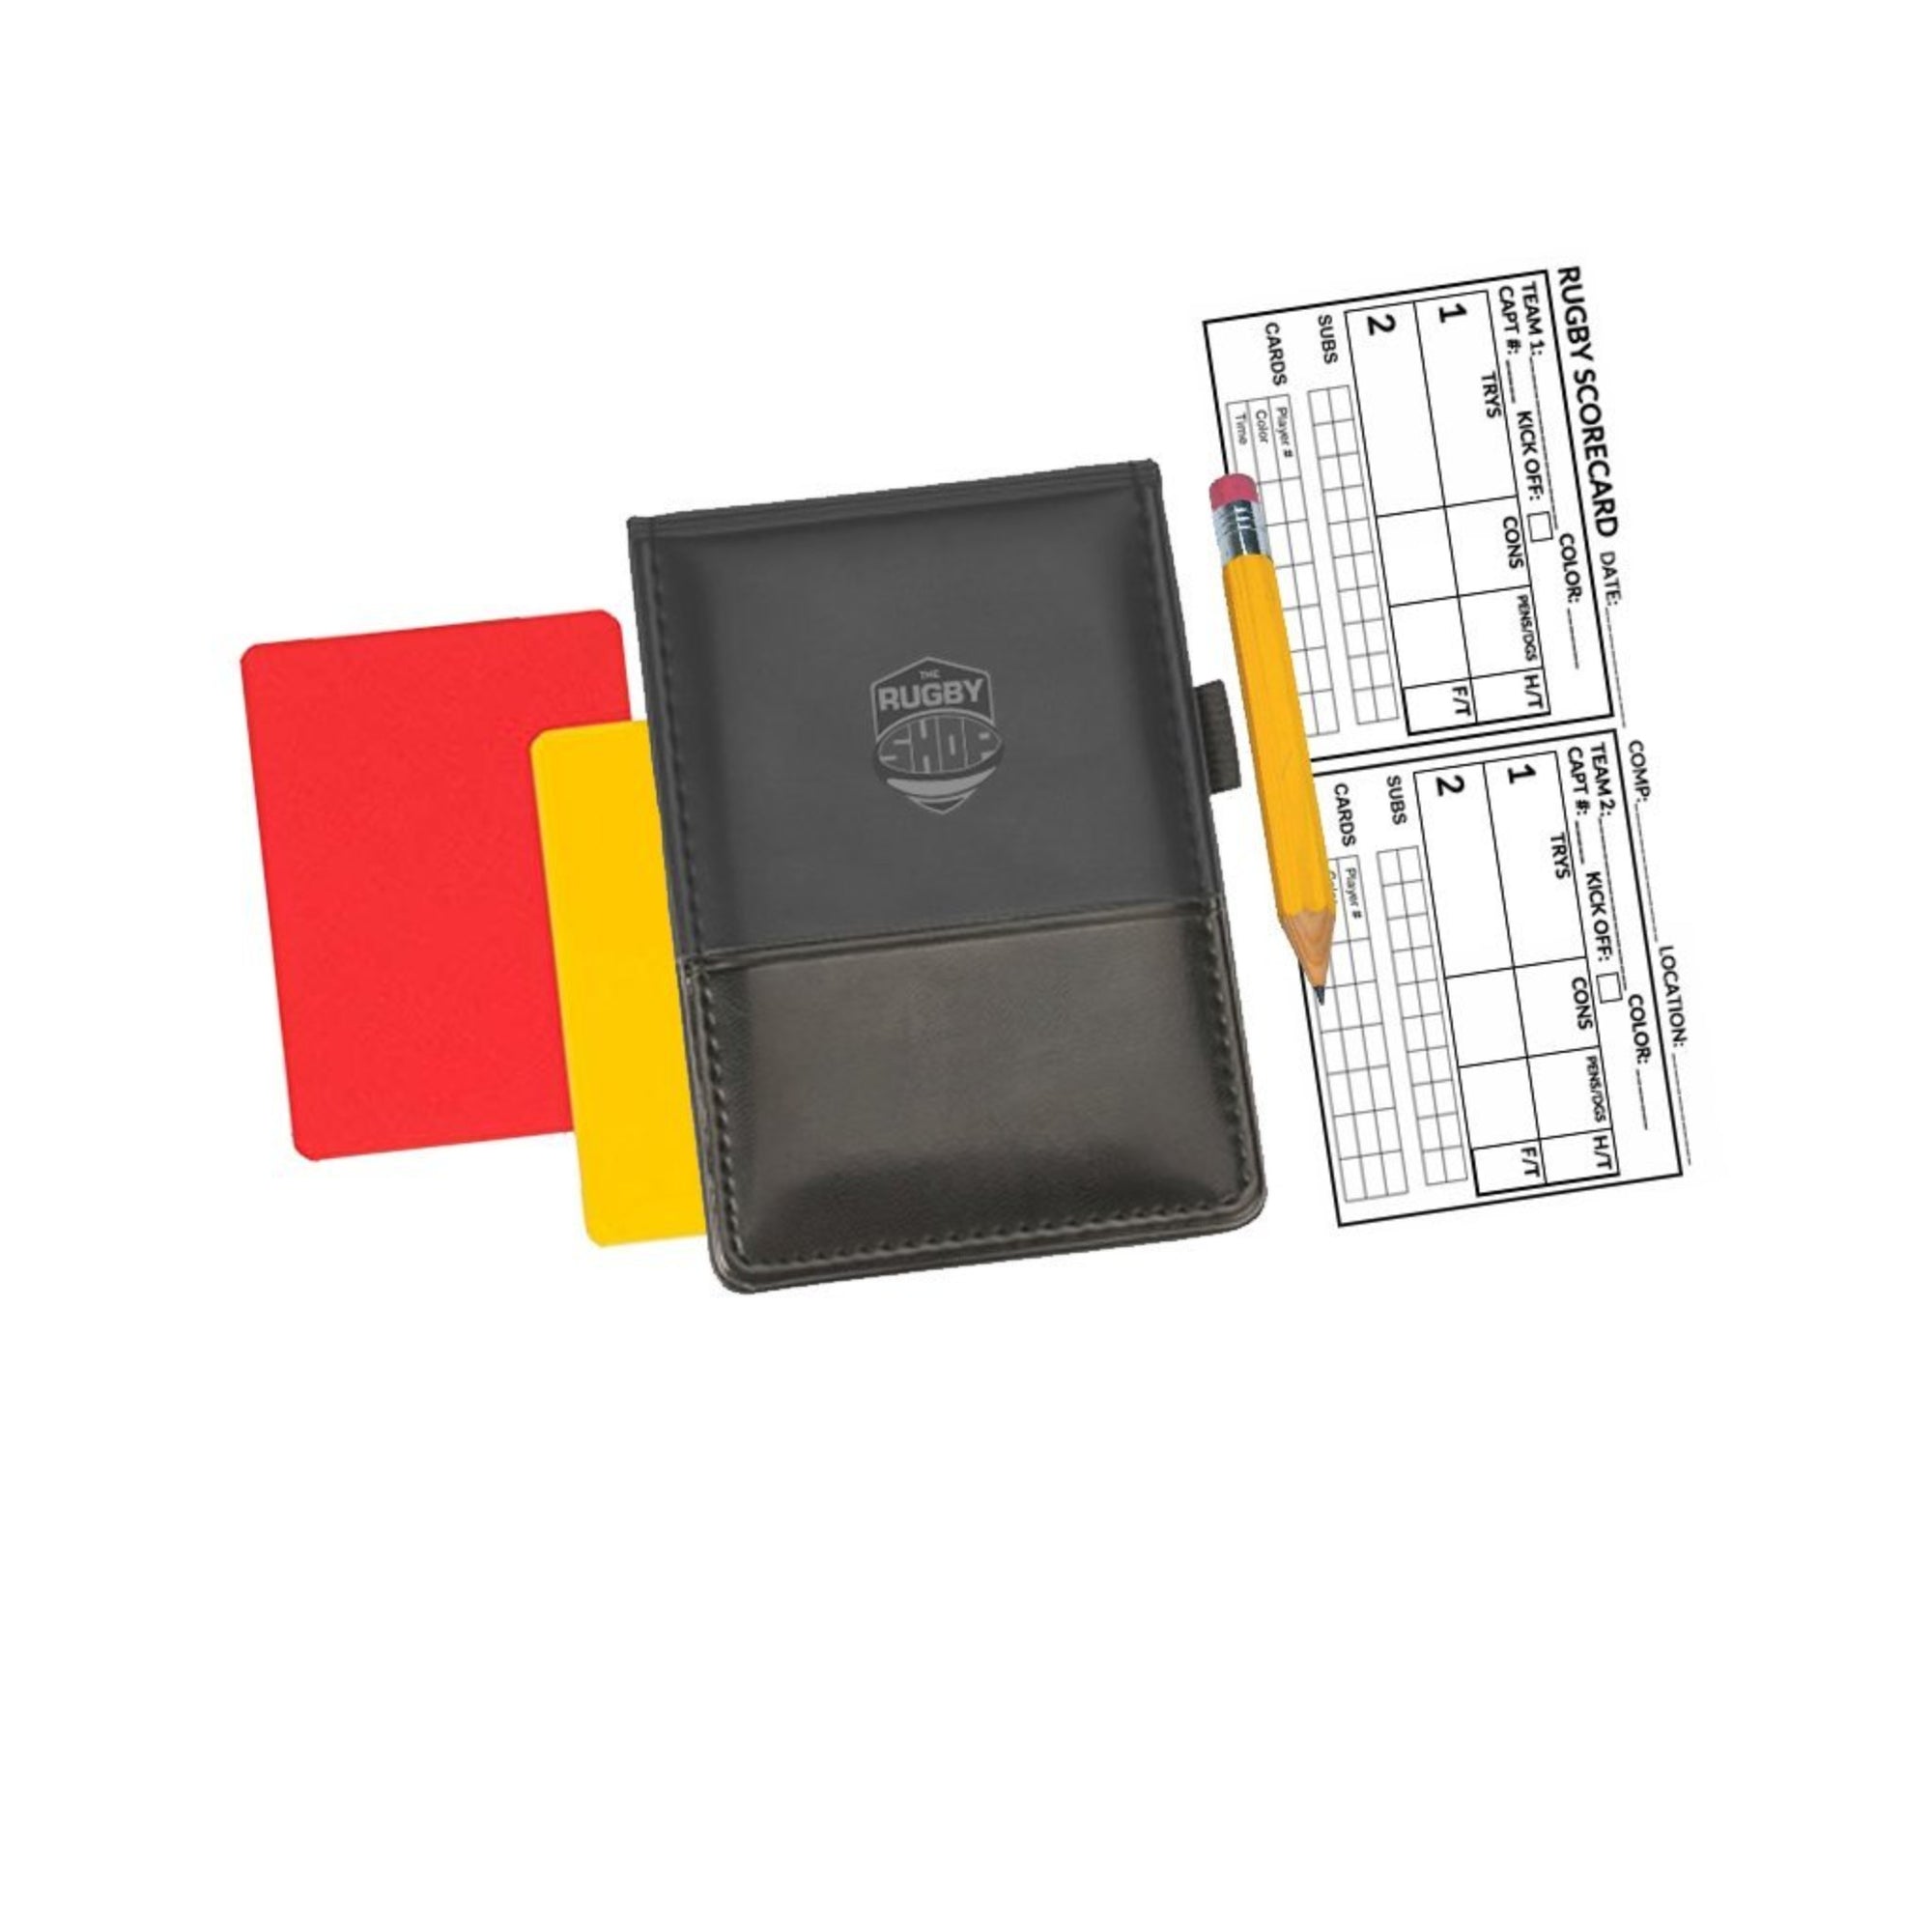 Referee Wallet Combo - www.therugbyshop.com www.therugbyshop.com 3RD PARTY ACCESSORIES Referee Wallet Combo